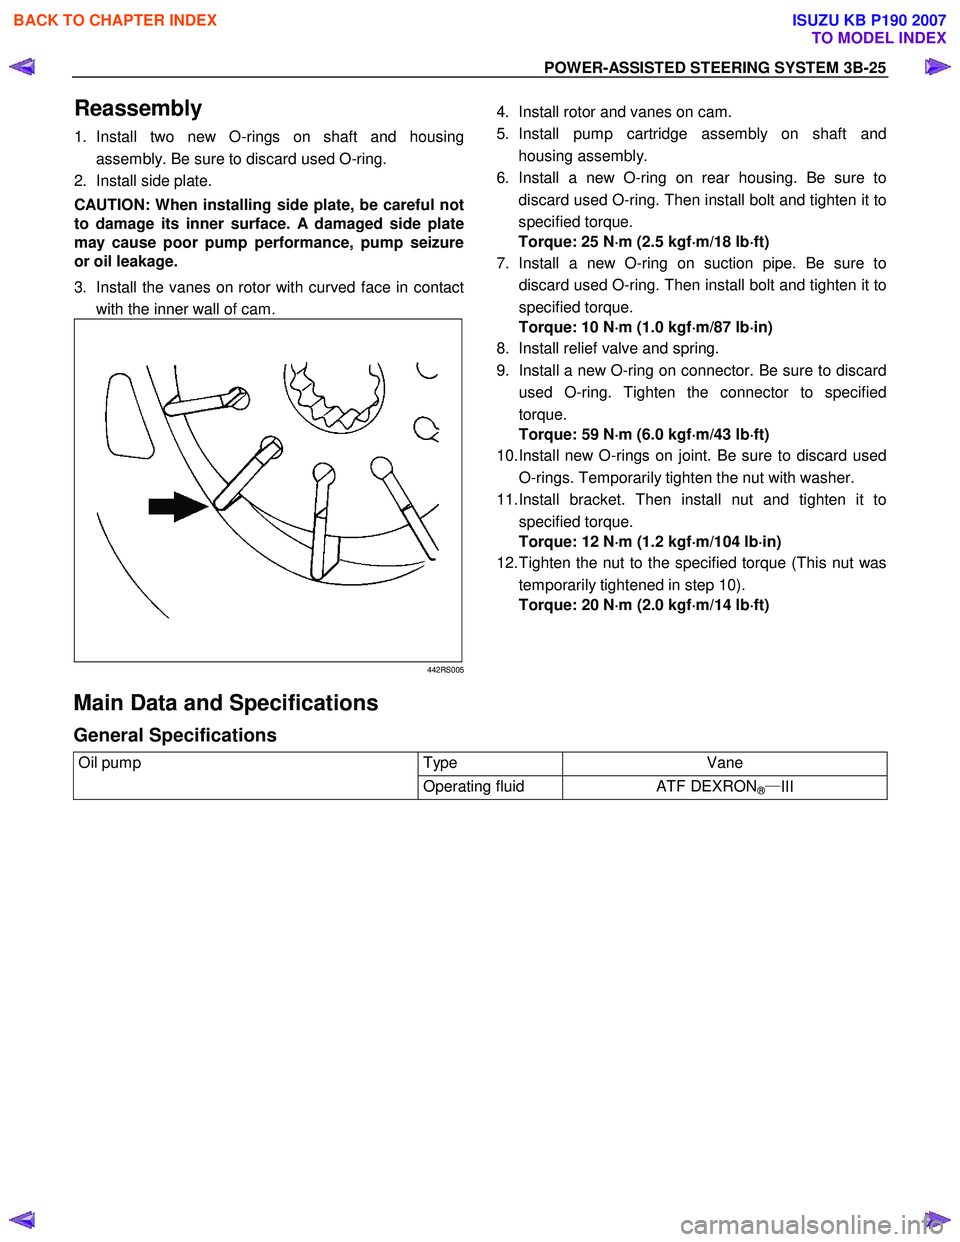 ISUZU KB P190 2007  Workshop Repair Manual POWER-ASSISTED STEERING SYSTEM 3B-25 
Reassembly 
1. Install two new O-rings on shaft and housing
assembly. Be sure to discard used O-ring. 
2.  Install side plate.  
CAUTION: When installing side pla